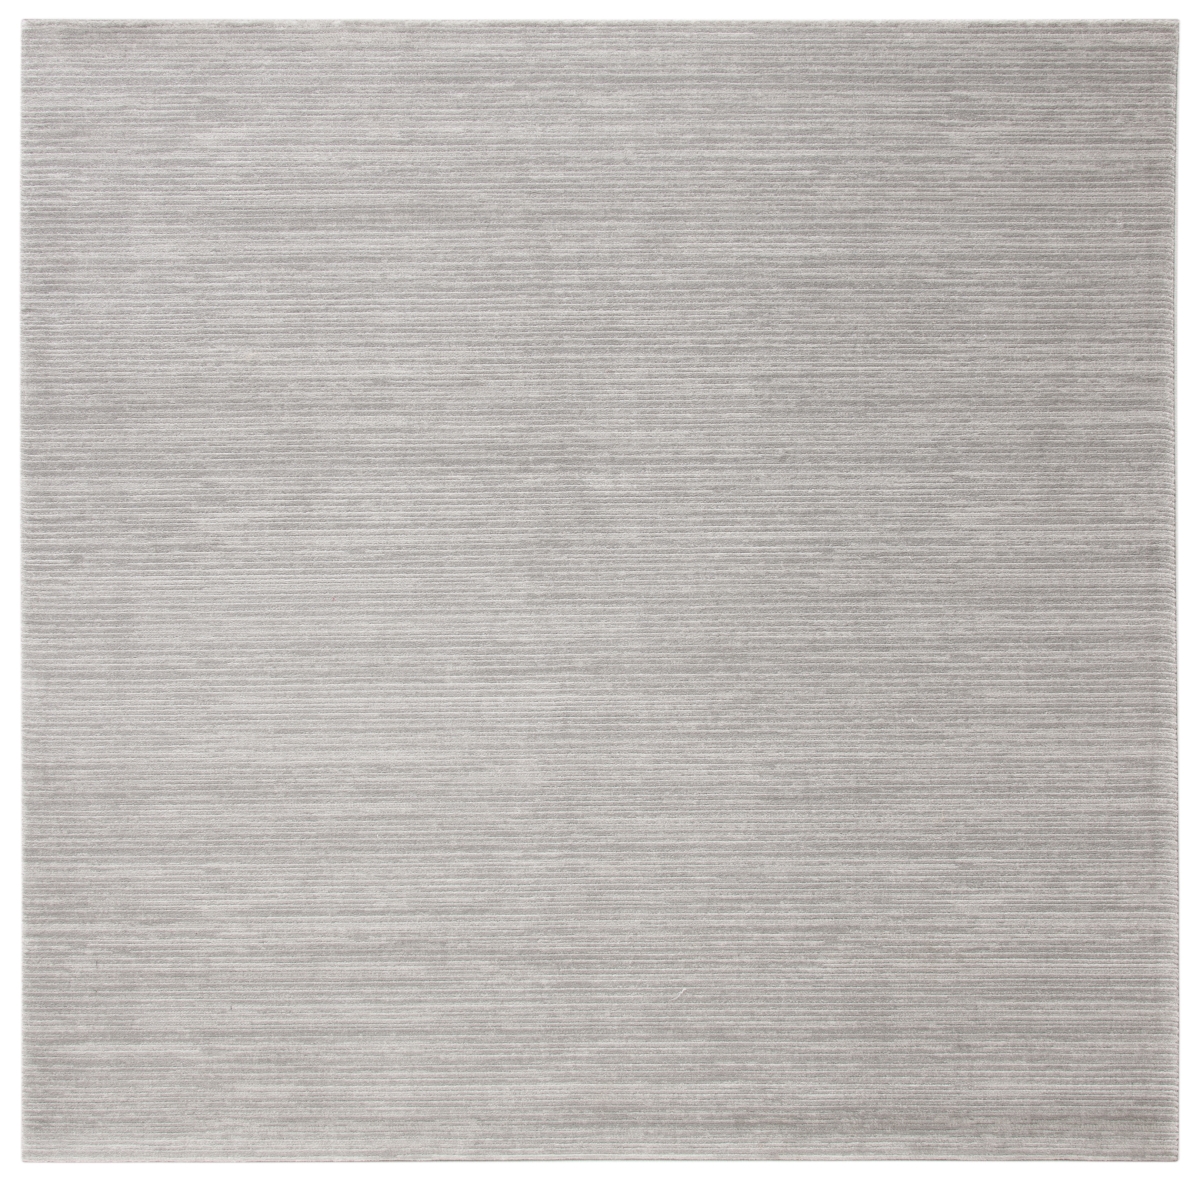 Picture of Safavieh VSN606G-10SQ 10 x 10 ft. Vision Contemporary Square Rug, Silver